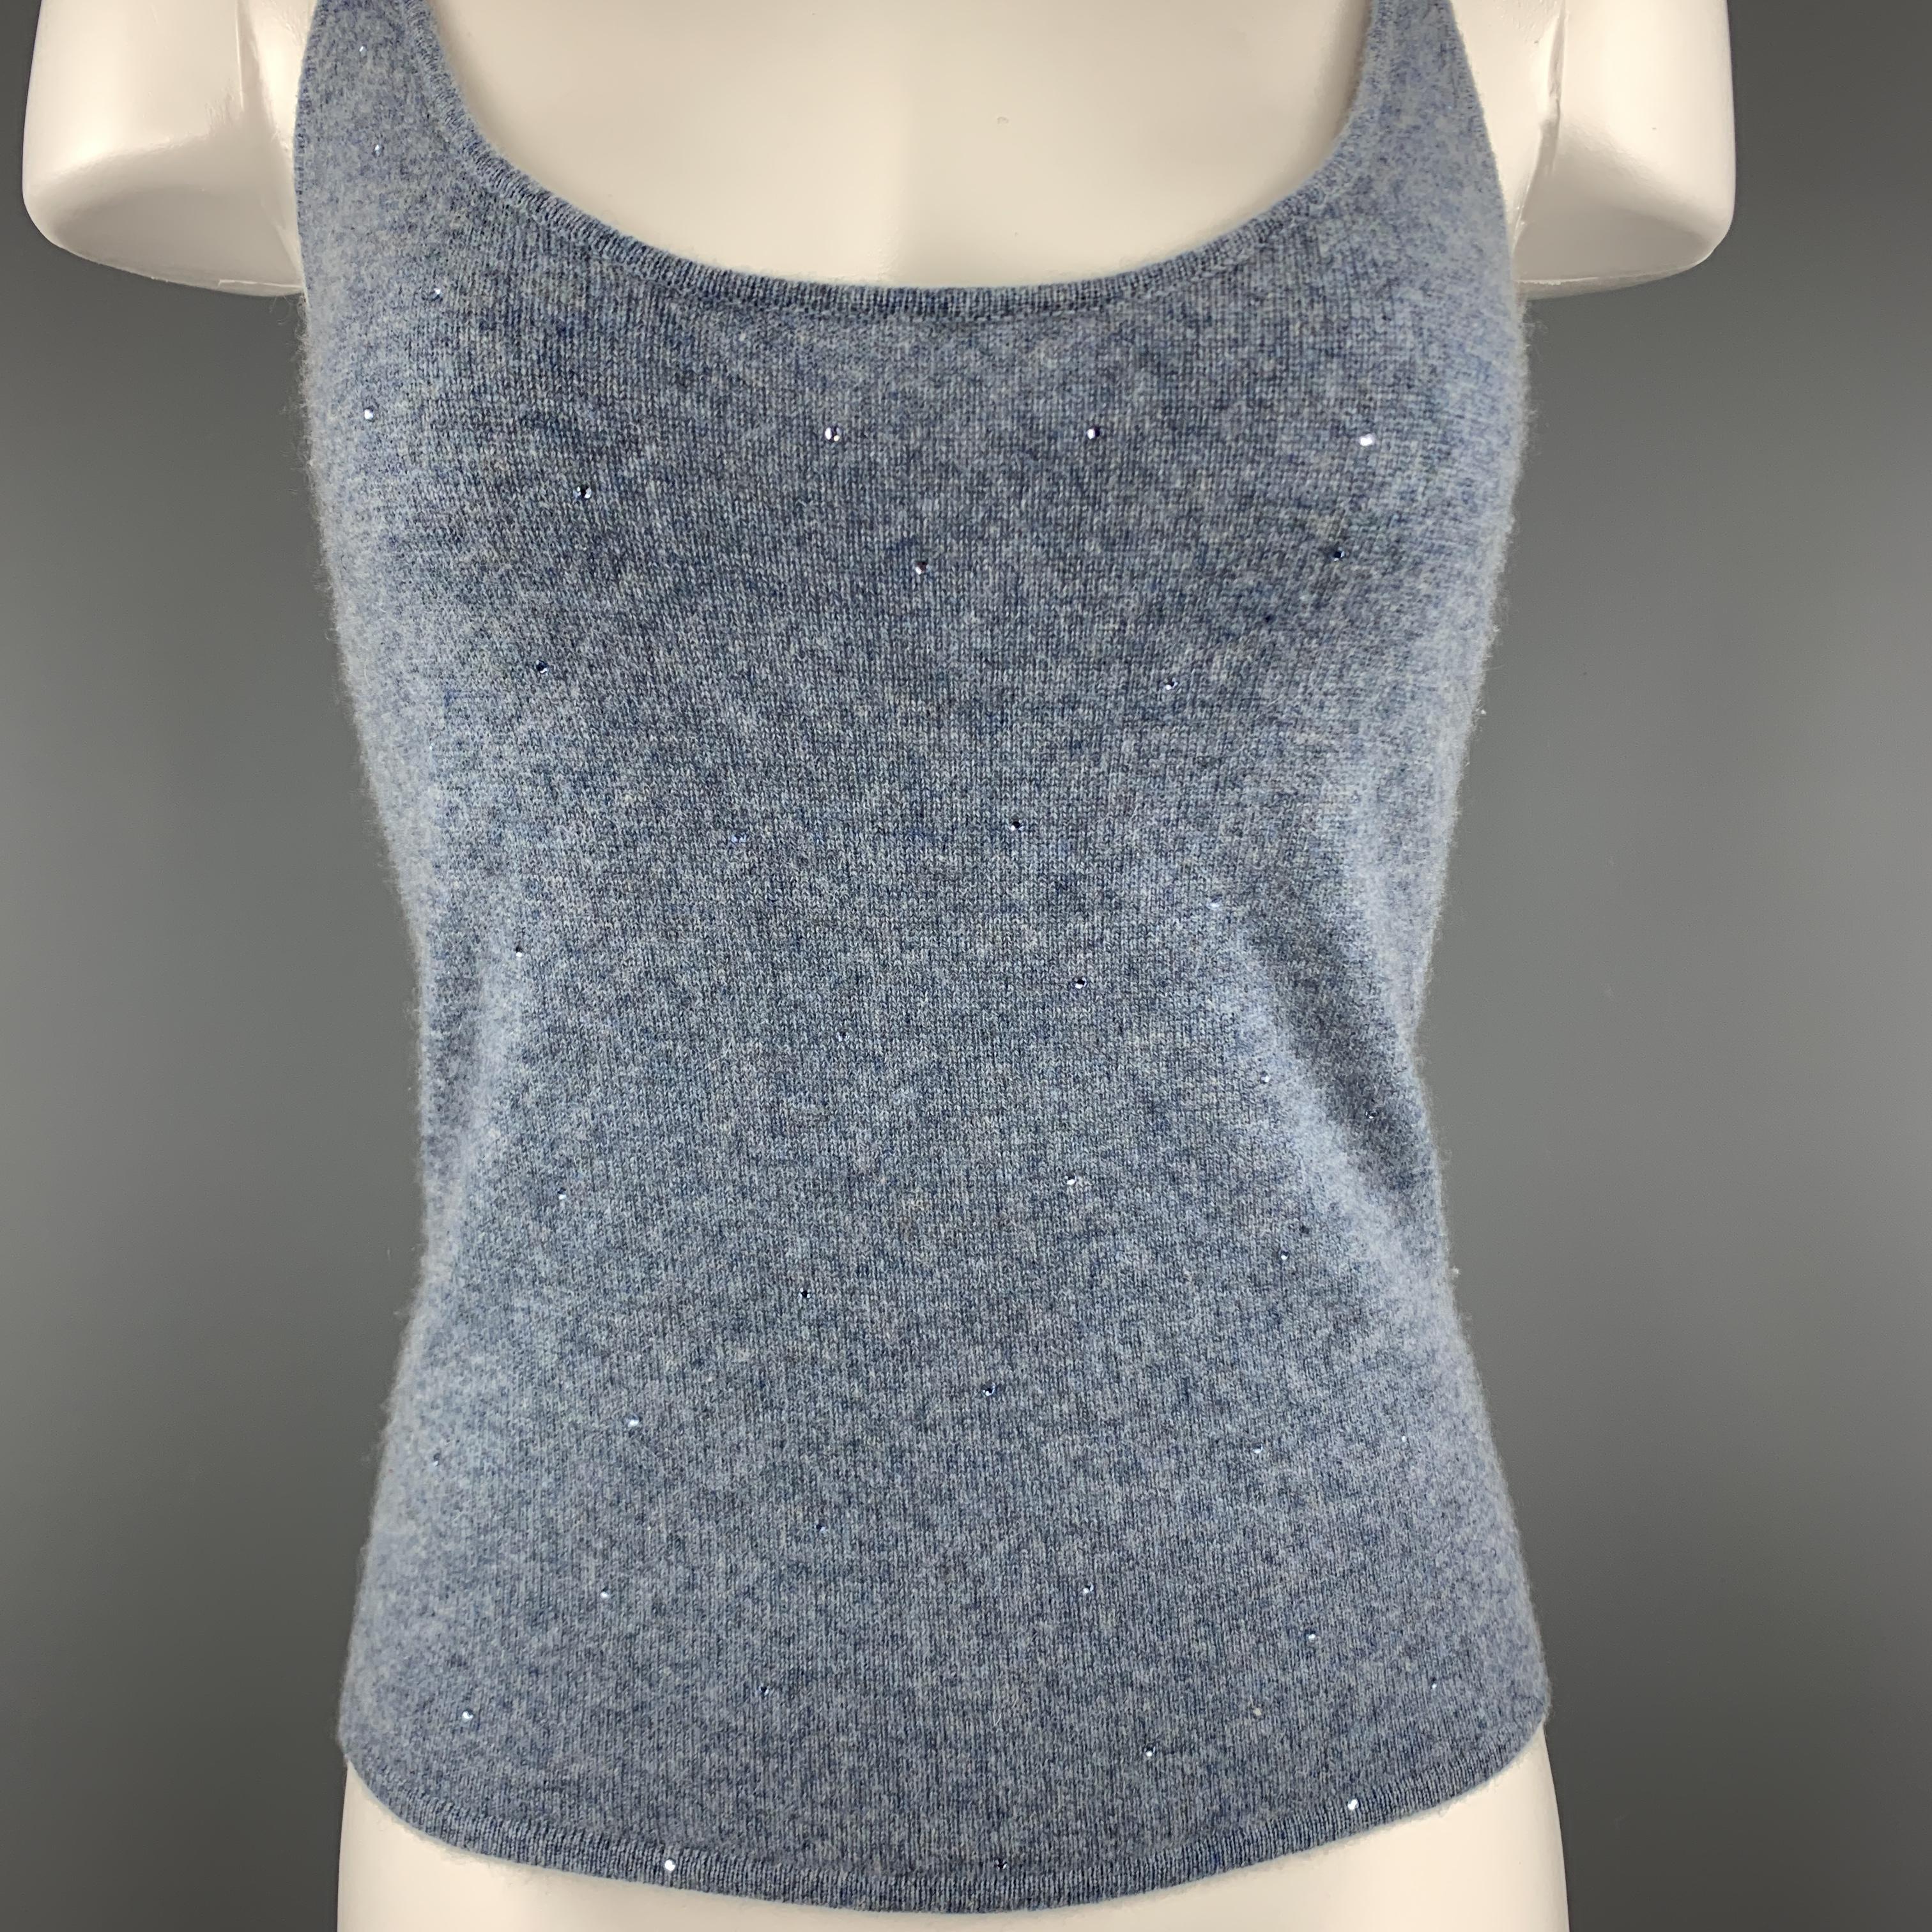 RALPH LAUREN BLACK LABEL camisole comes in muted blue heathered cashmere knit with spaghetti straps and crystal studs throughout. Matching cardigan available separately. 

Excellent Pre-Owned Condition.
Marked:  M

Measurements:

Shoulder: 12